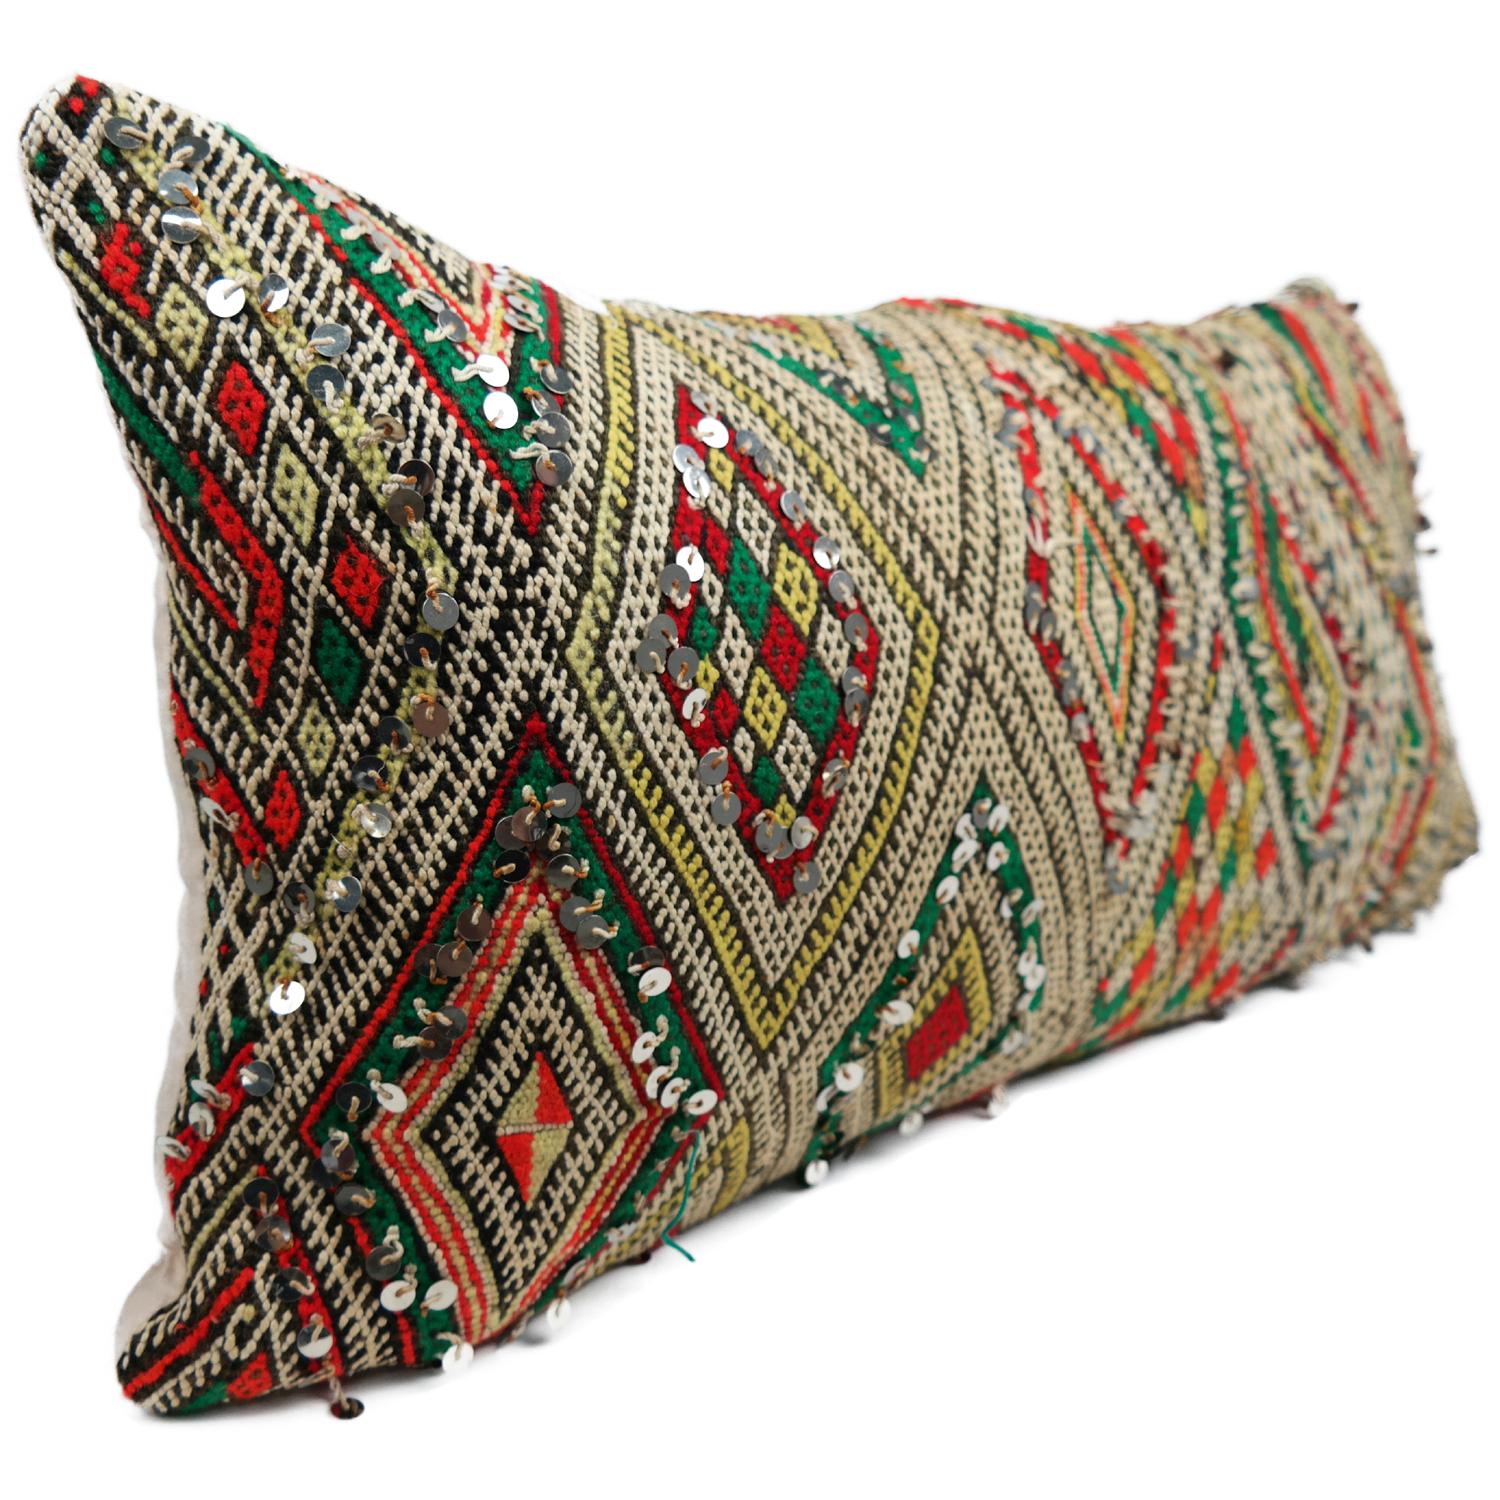 A stunning extra large Bohemian Moroccan Kilim cushion custom made in Morocco. Cut from a circa 40 years old hand loomed Kilim rug, from the Middle Atlas Mountains. We have searched and selected the rug ourselves. The pillow has beautiful colors